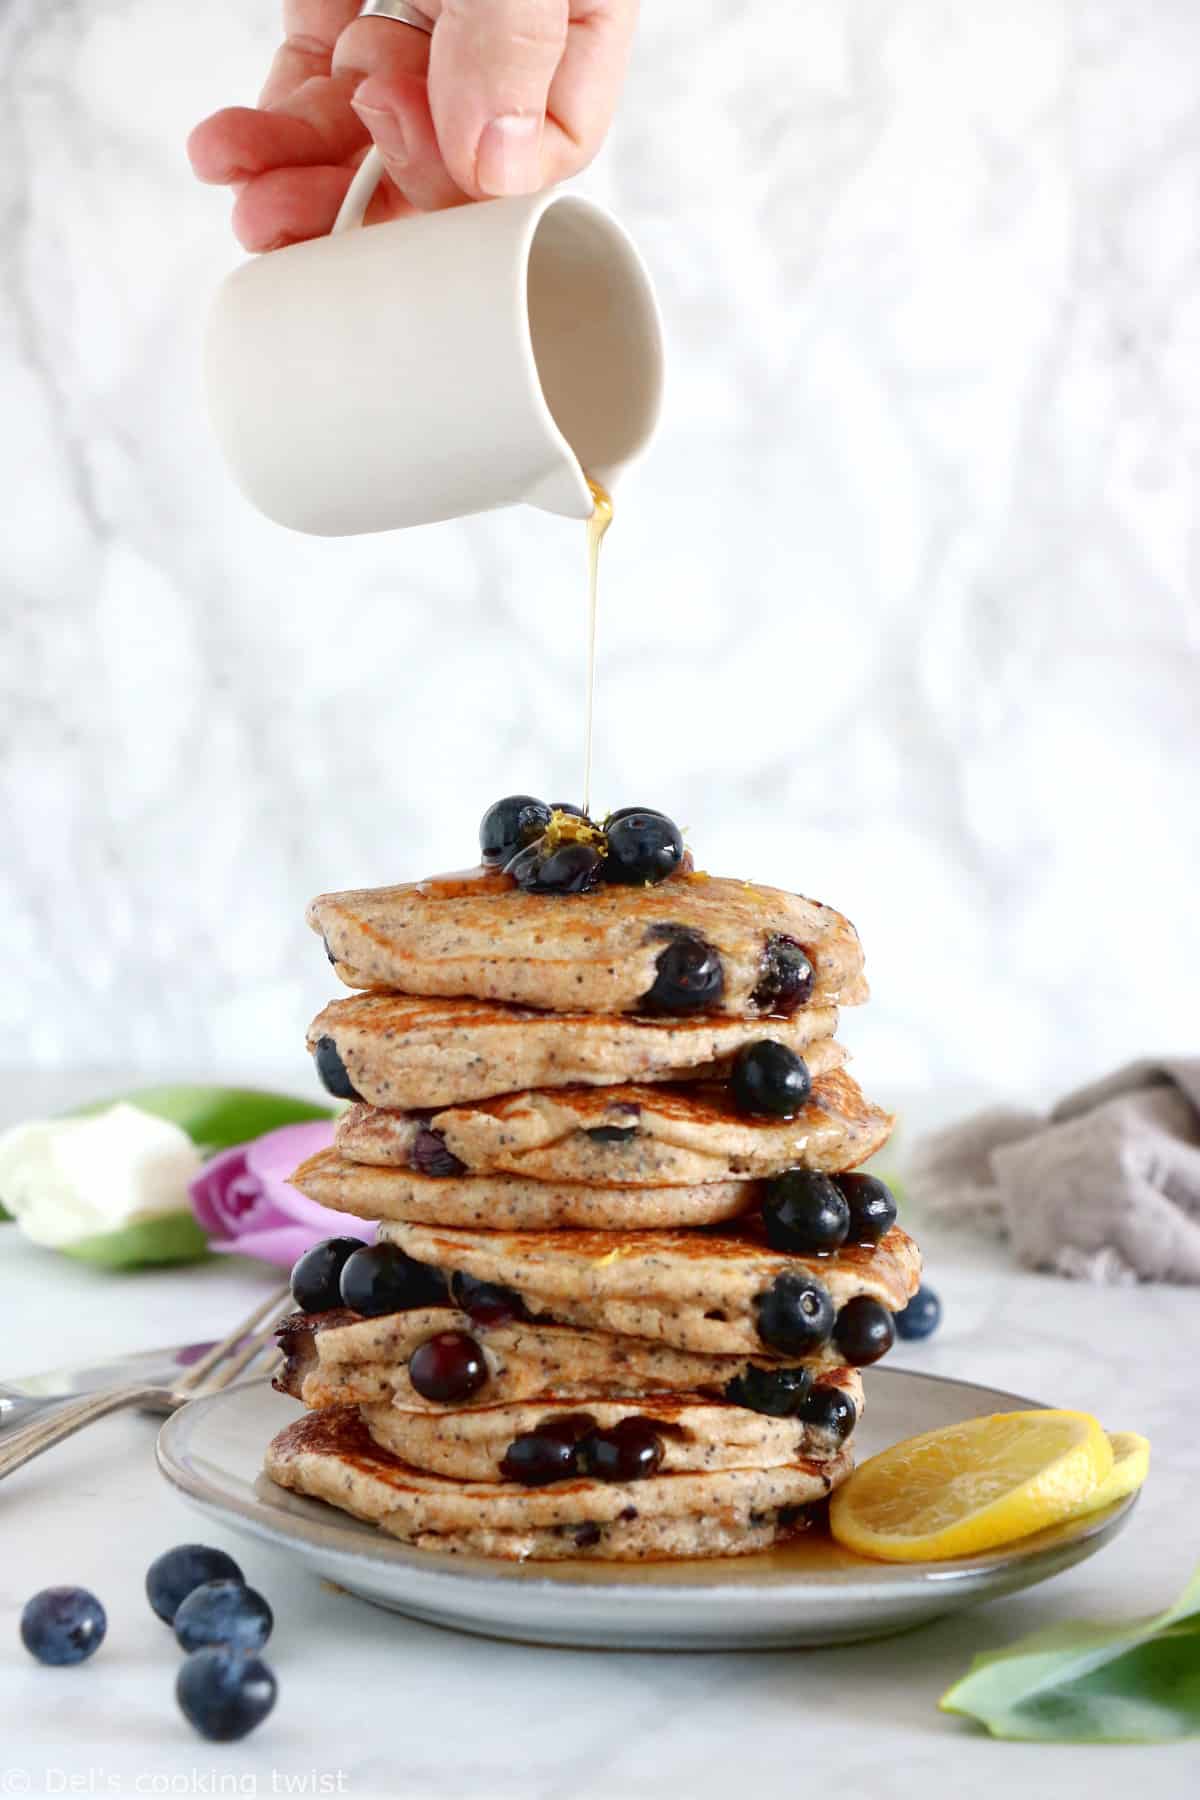 Easy Fluffy American Pancakes - Del's cooking twist